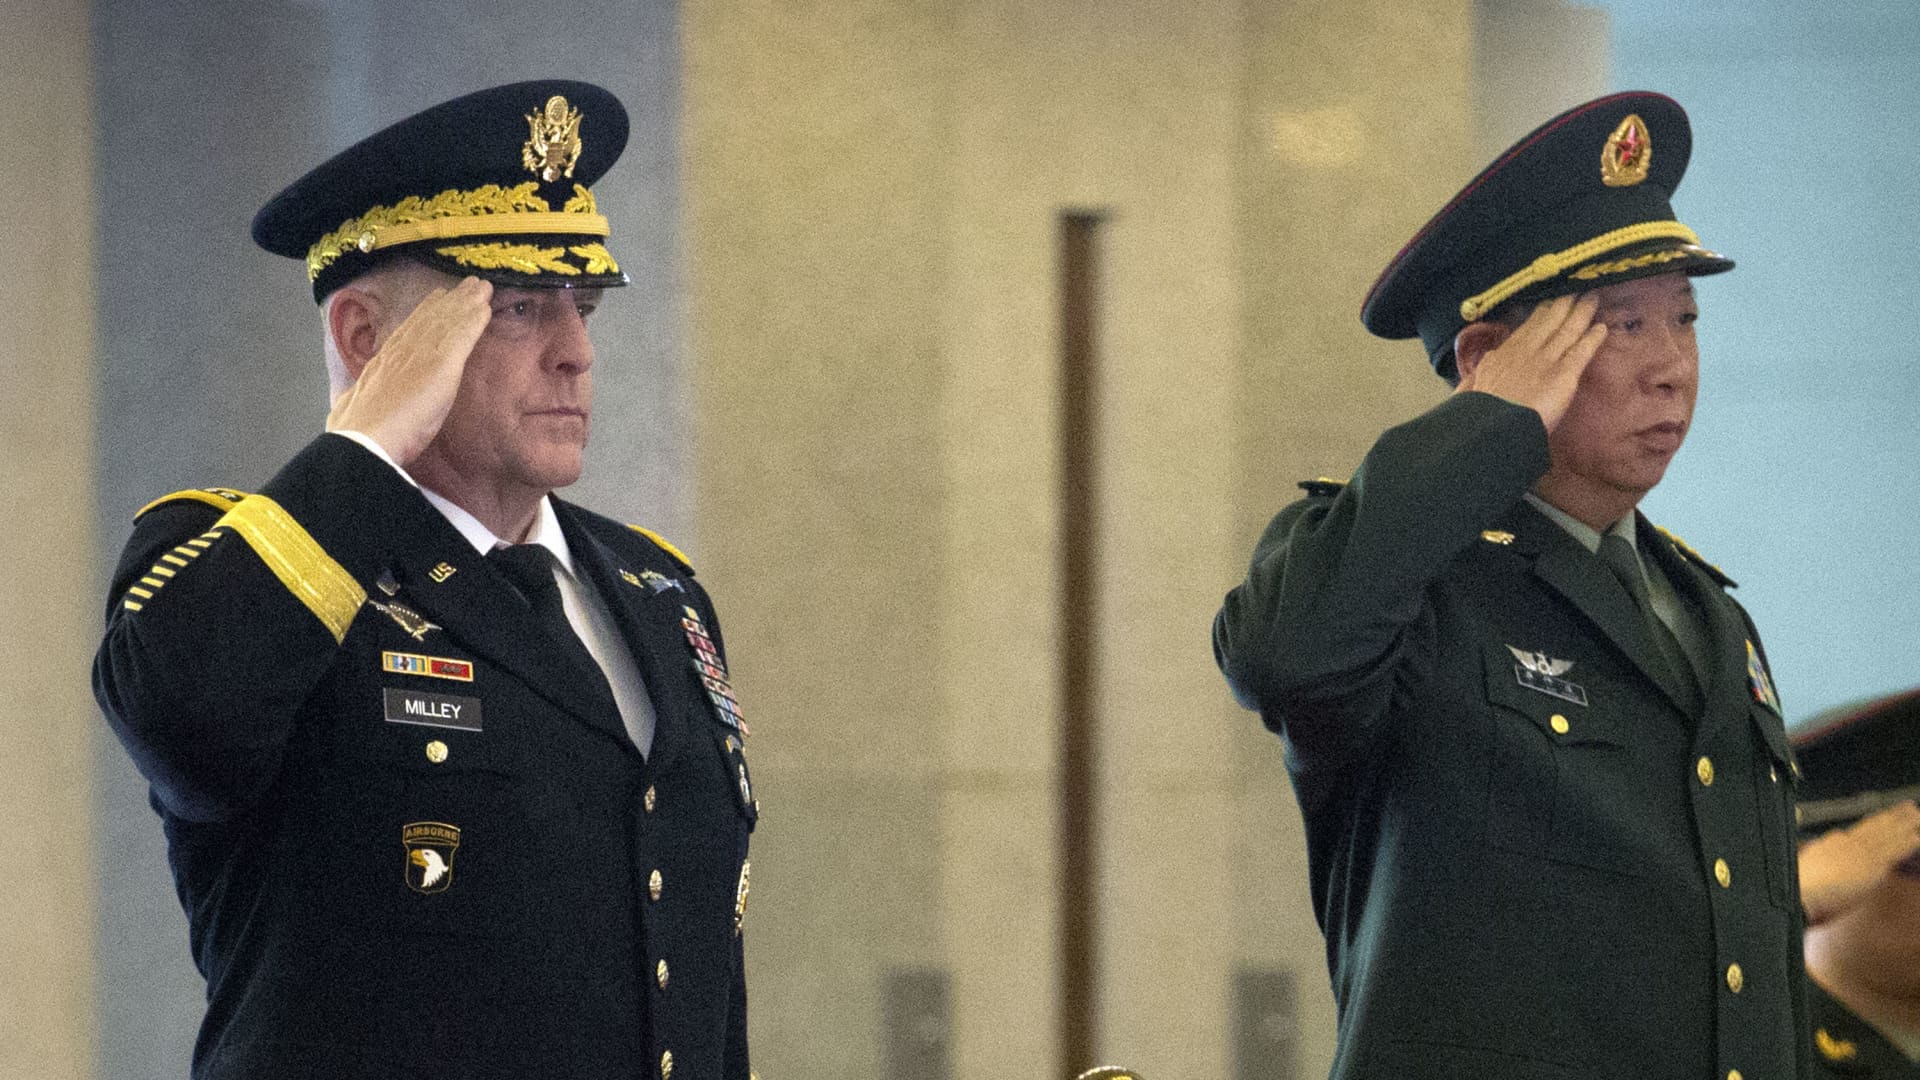 US Army Chief of Staff General Mark Milley (L) and China's People's Liberation Army (PLA) General Li Zuocheng salute during a welcome ceremony at the Bayi Building in Beijing on August 16, 2016.